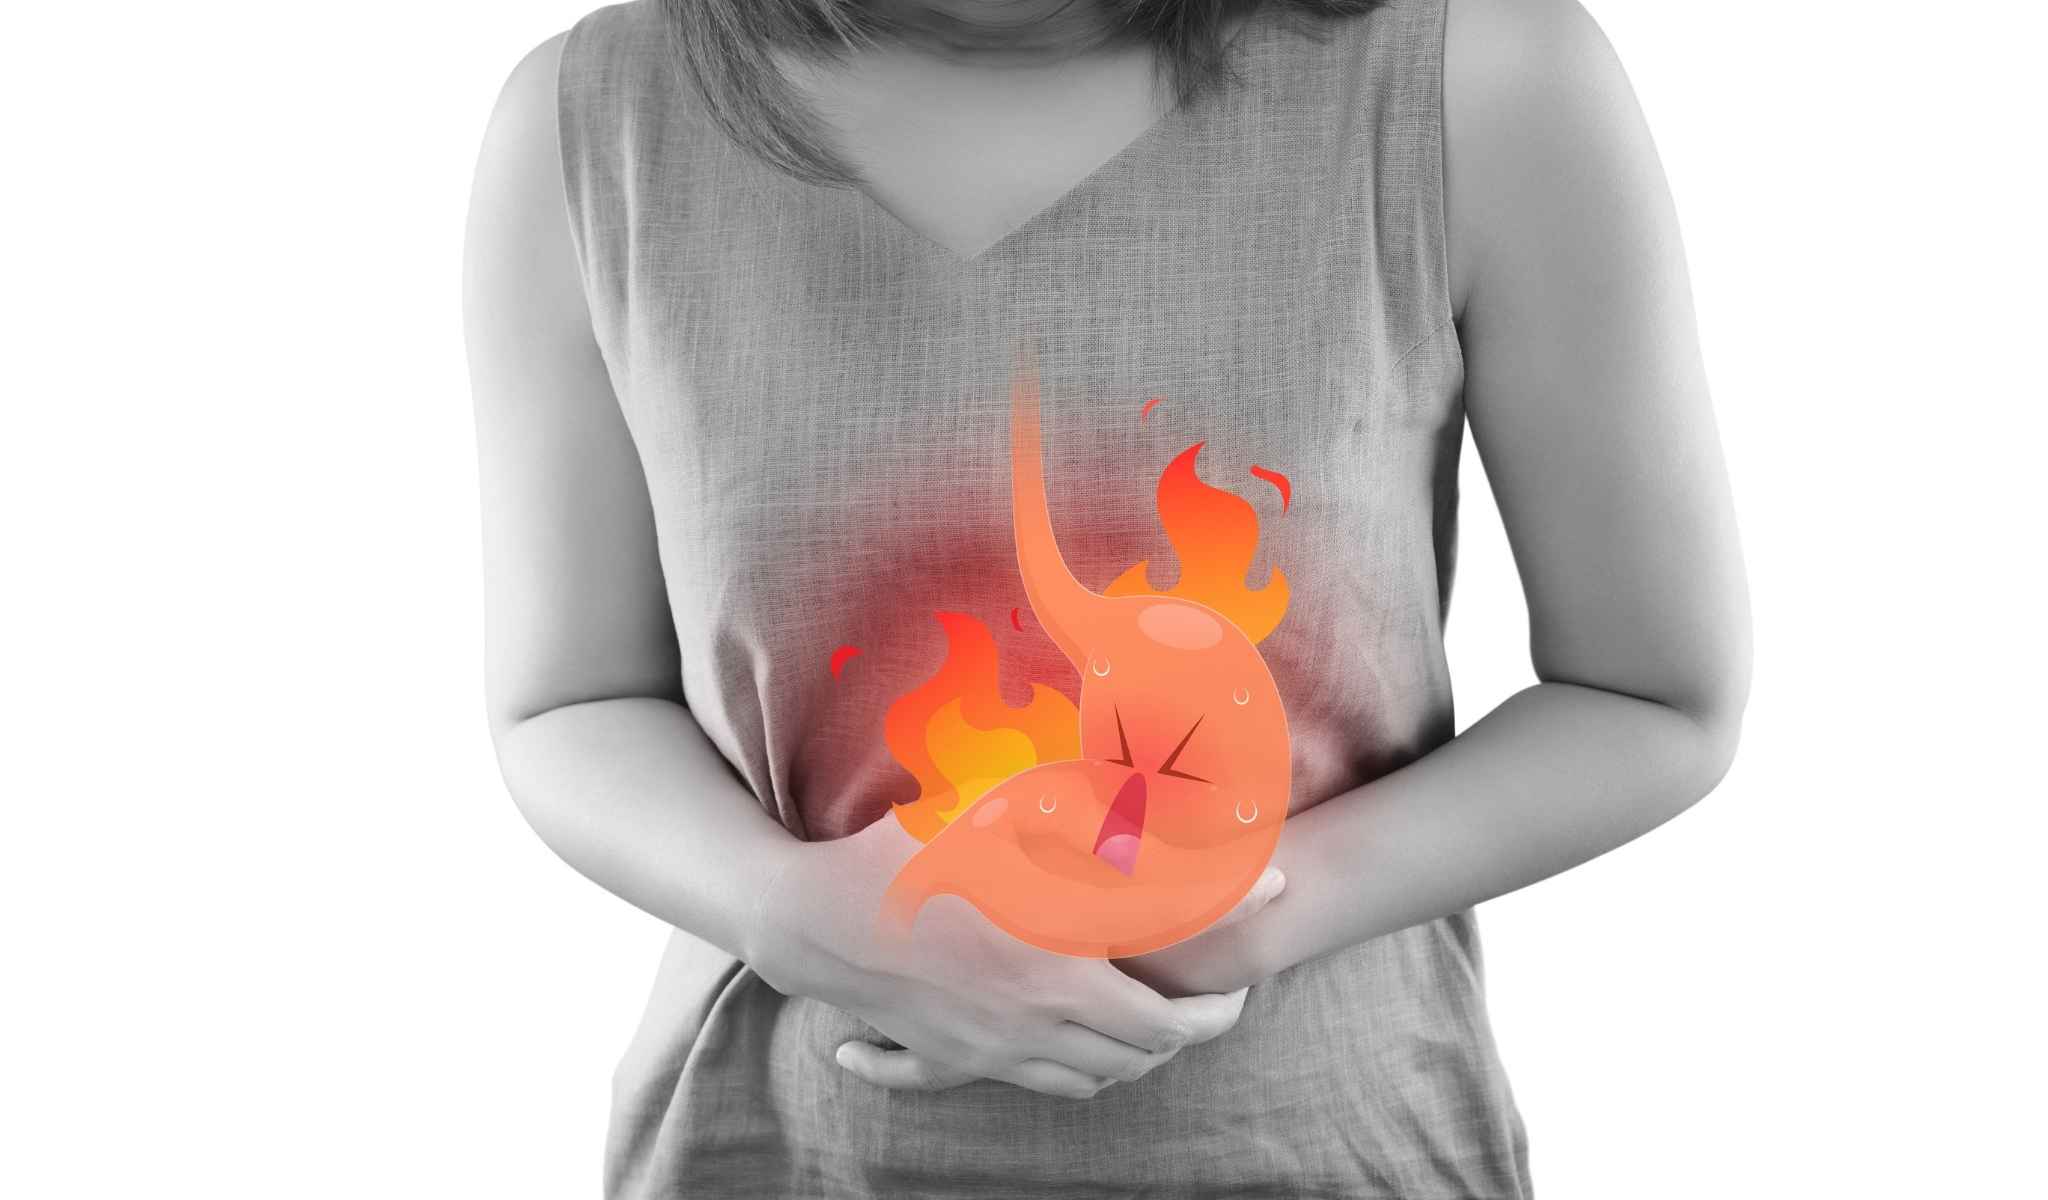 CBD Oil For Acid Reflux & GERD: Therapeutic Benefits and Risks